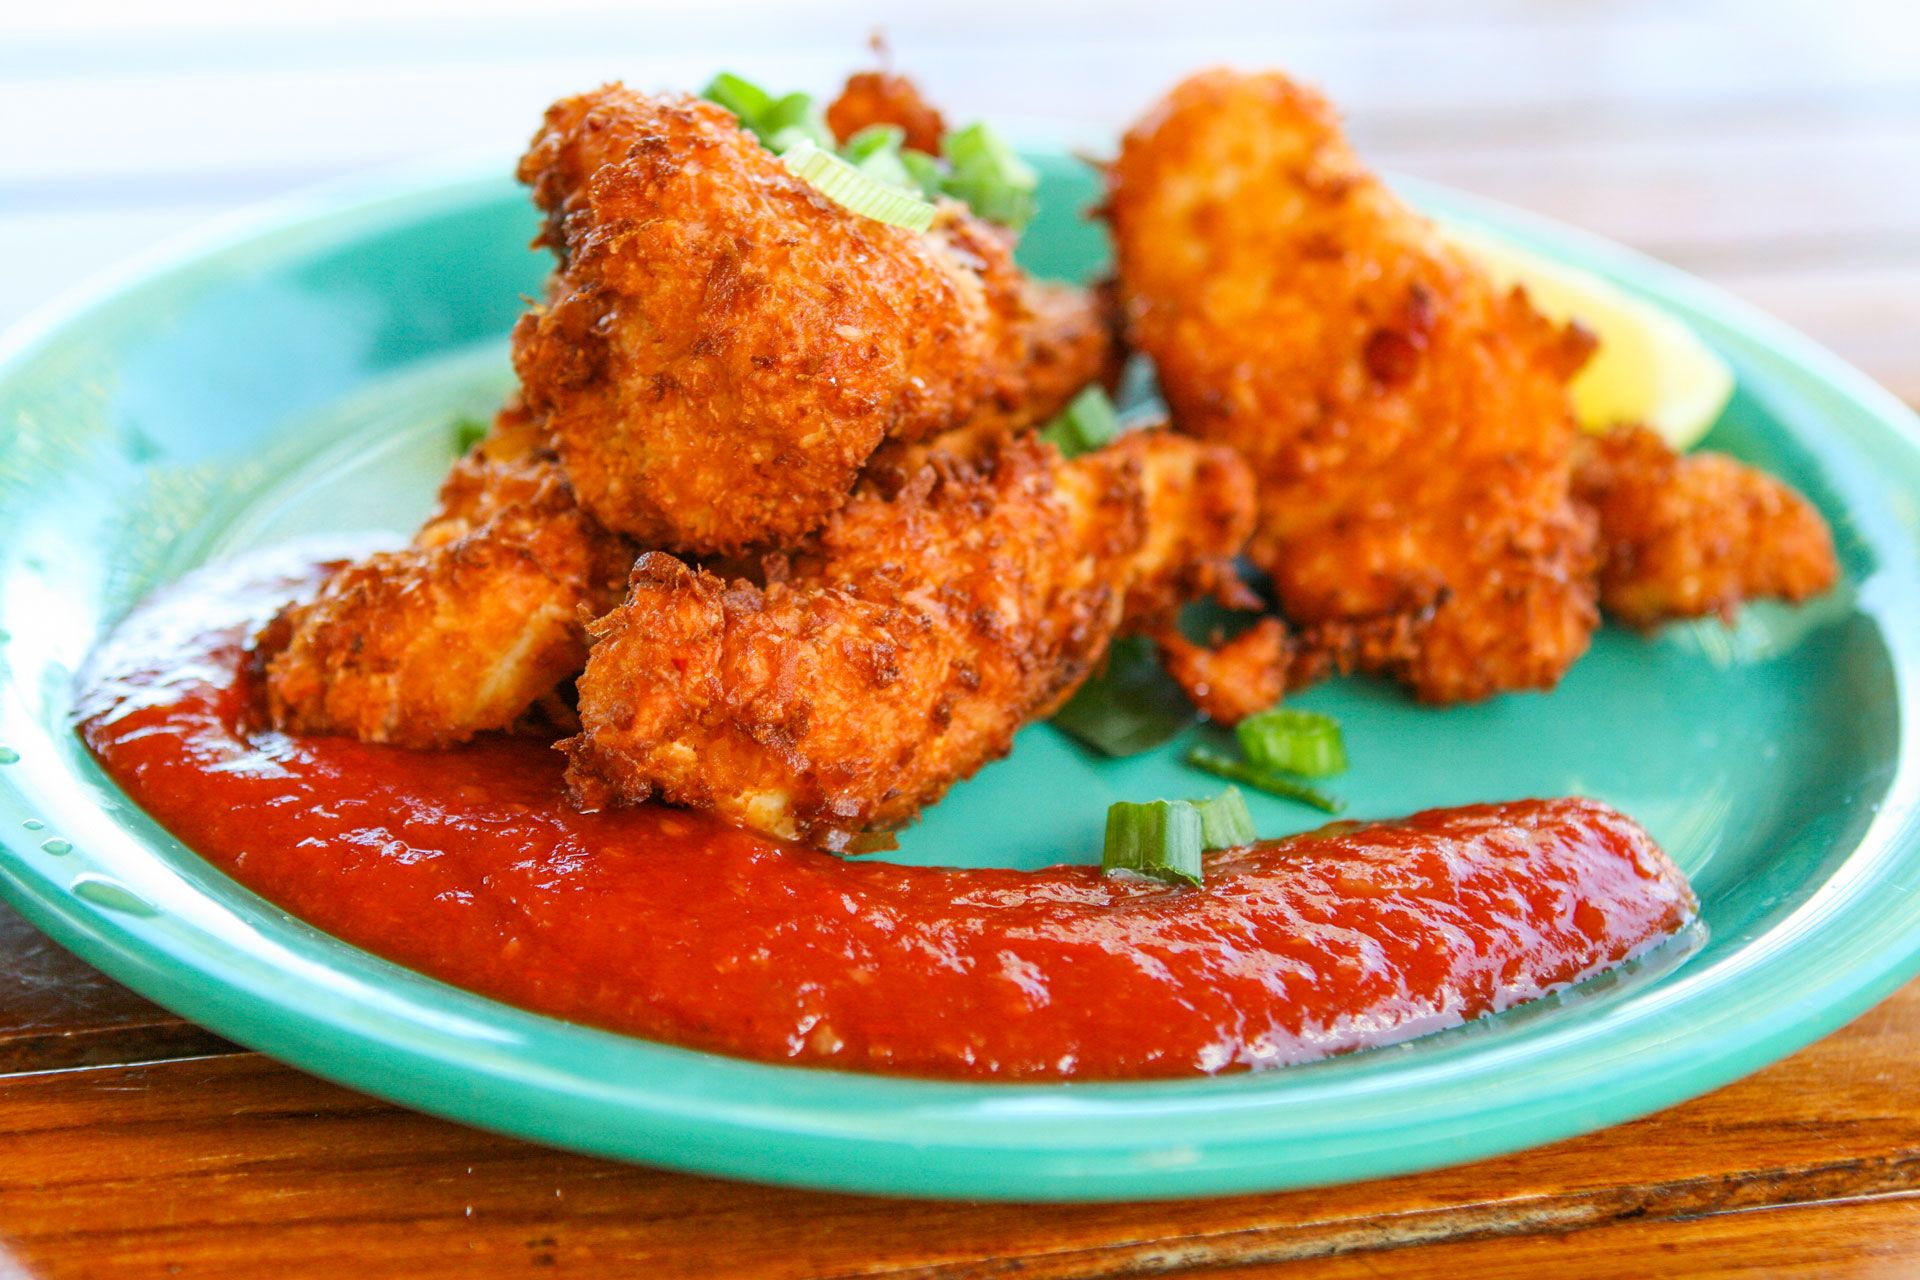 Bahamian conch fritters